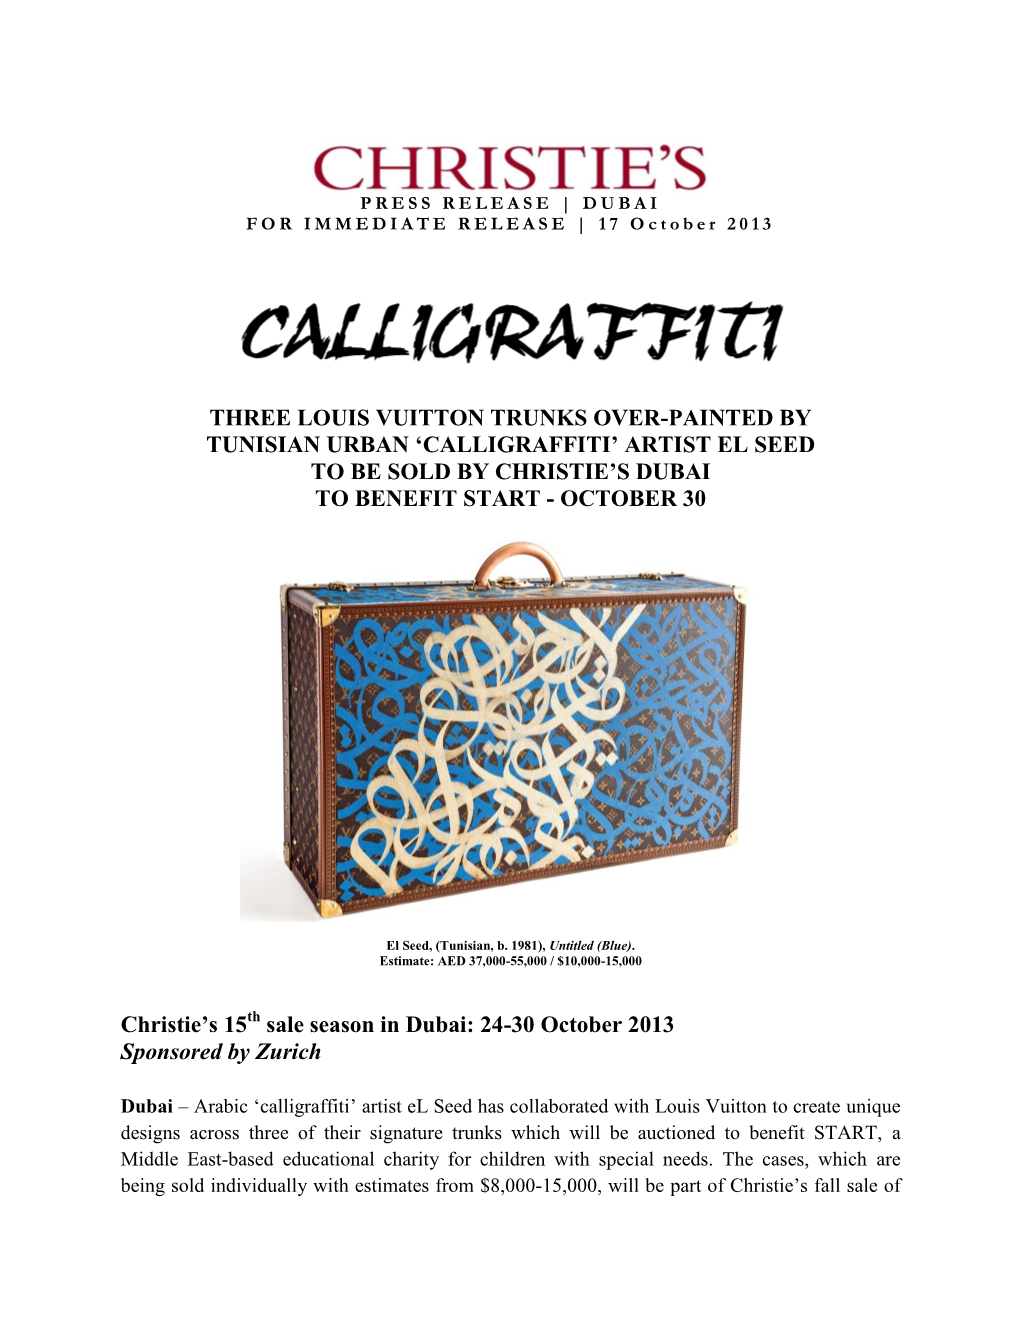 Calligraffiti’ Artist El Seed to Be Sold by Christie’S Dubai to Benefit Start - October 30